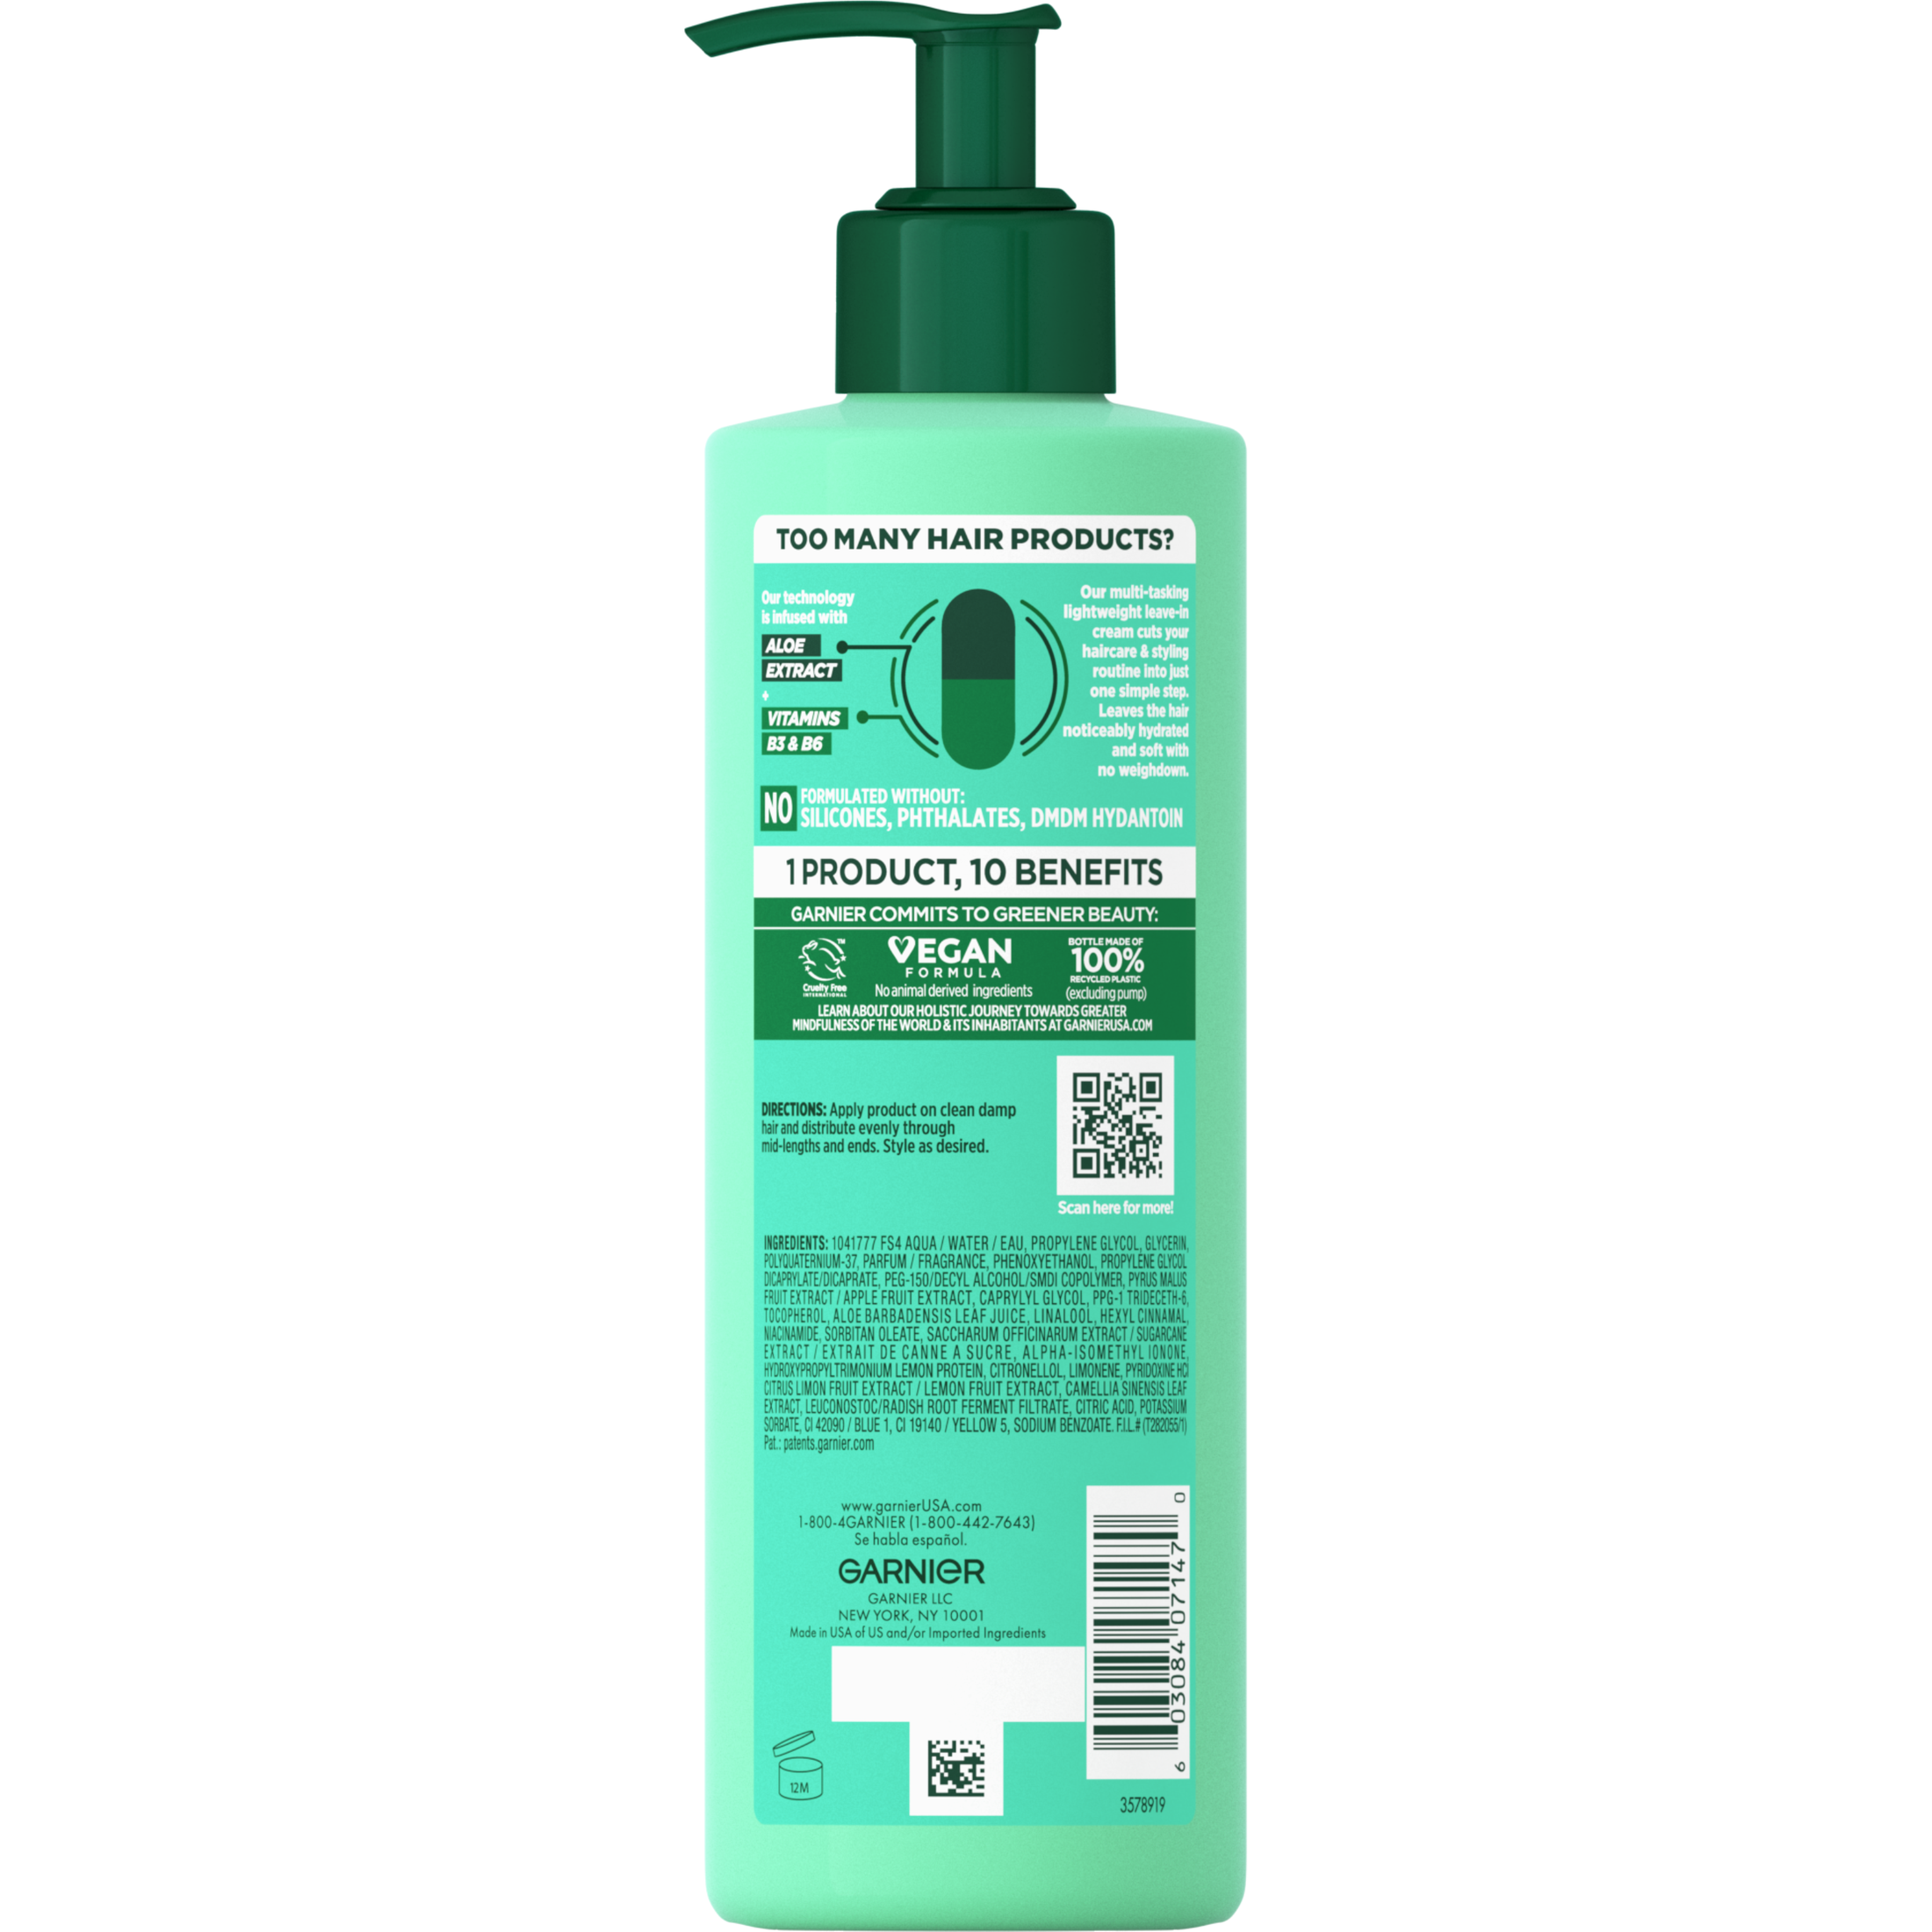 Garnier Fructis Pure Clean 10-in-1 Care and Styling Leave In Cream, 12 fl oz - image 2 of 9